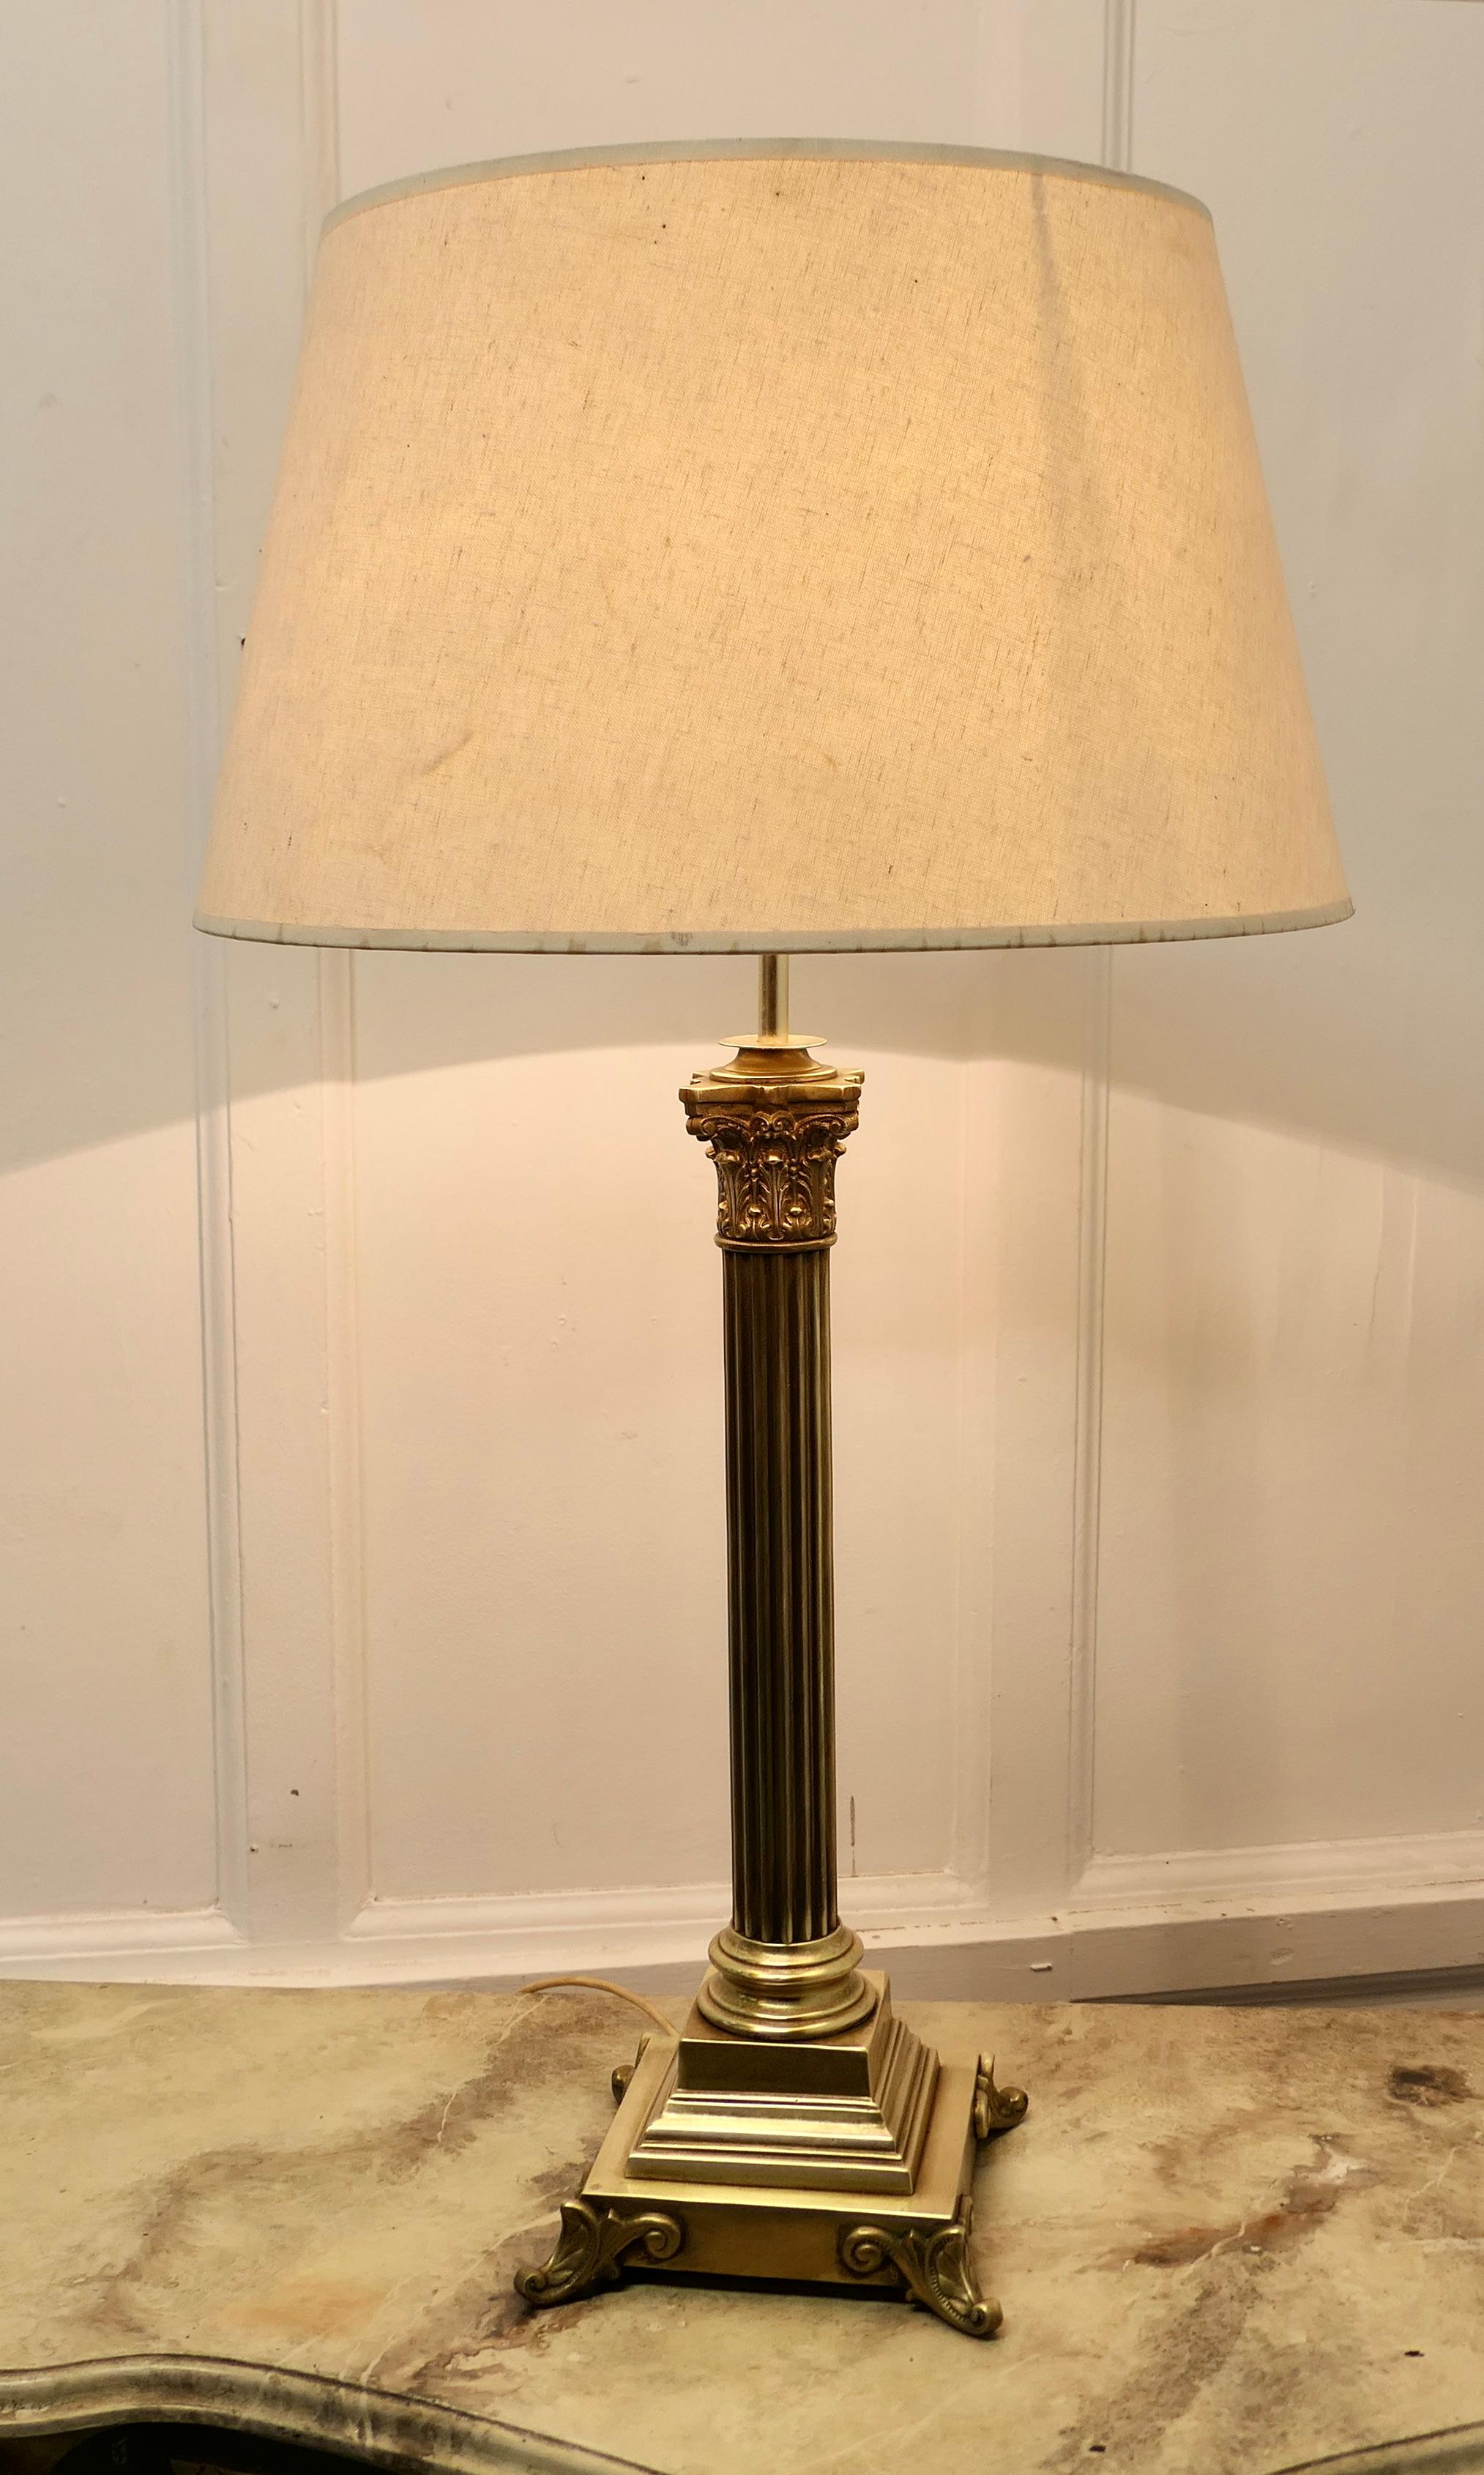 A tall brass Corinthian column table lamp with shade

This is a very attractive lamp it has a heavy single corinthian style column set on a stepped rectangular base, it comes with a neutral coloured linen lamp shade, this can be included if